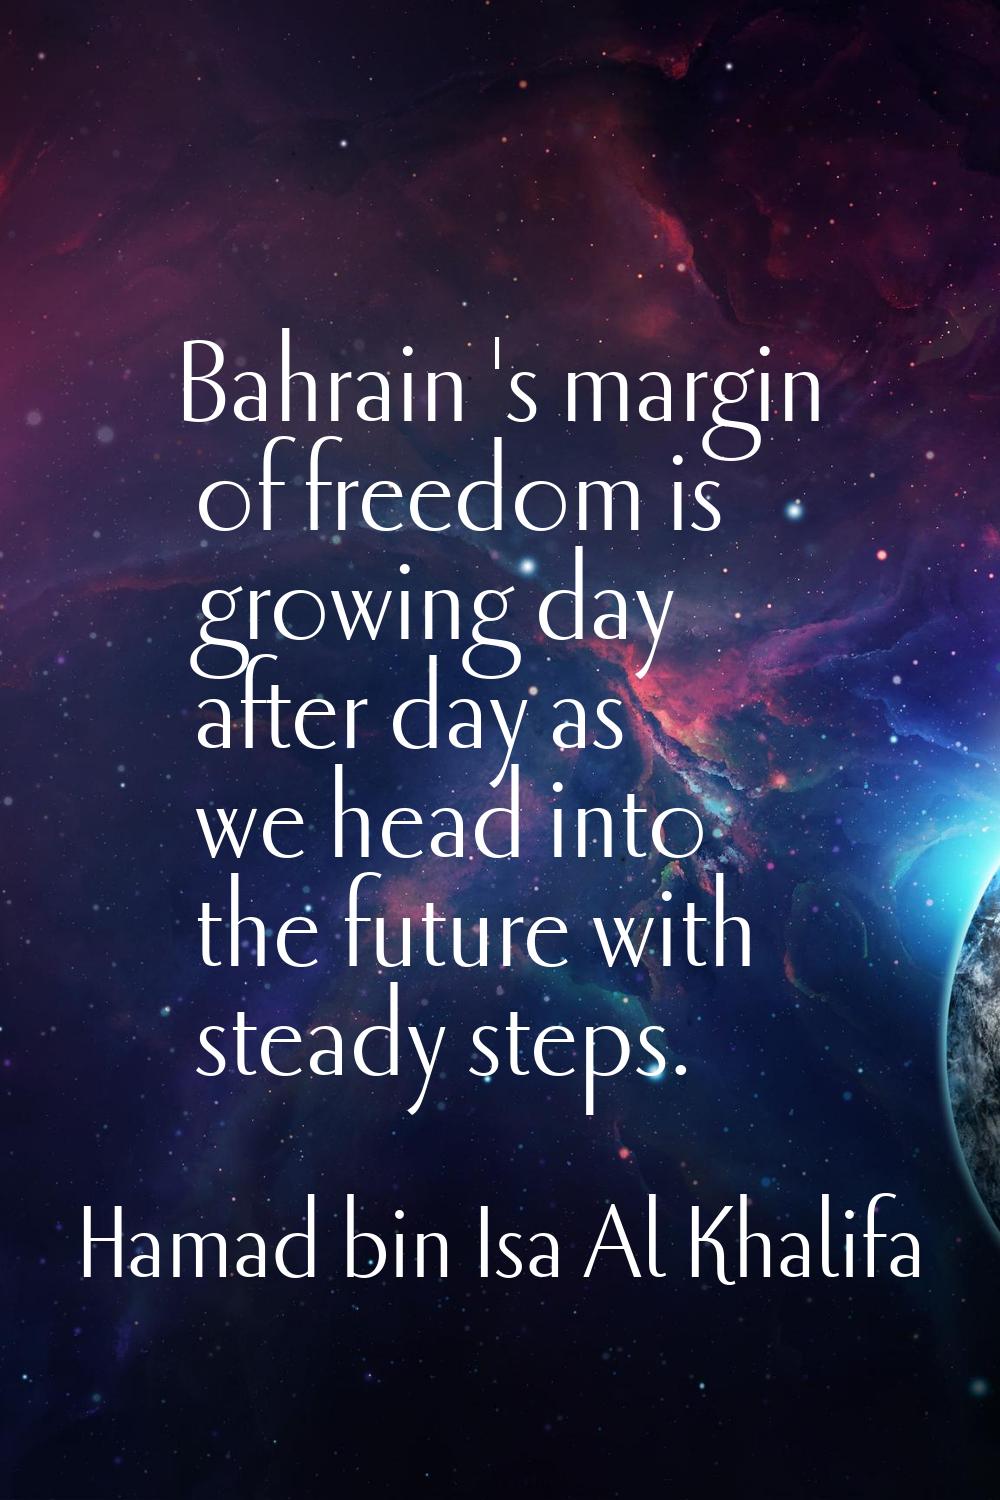 Bahrain 's margin of freedom is growing day after day as we head into the future with steady steps.